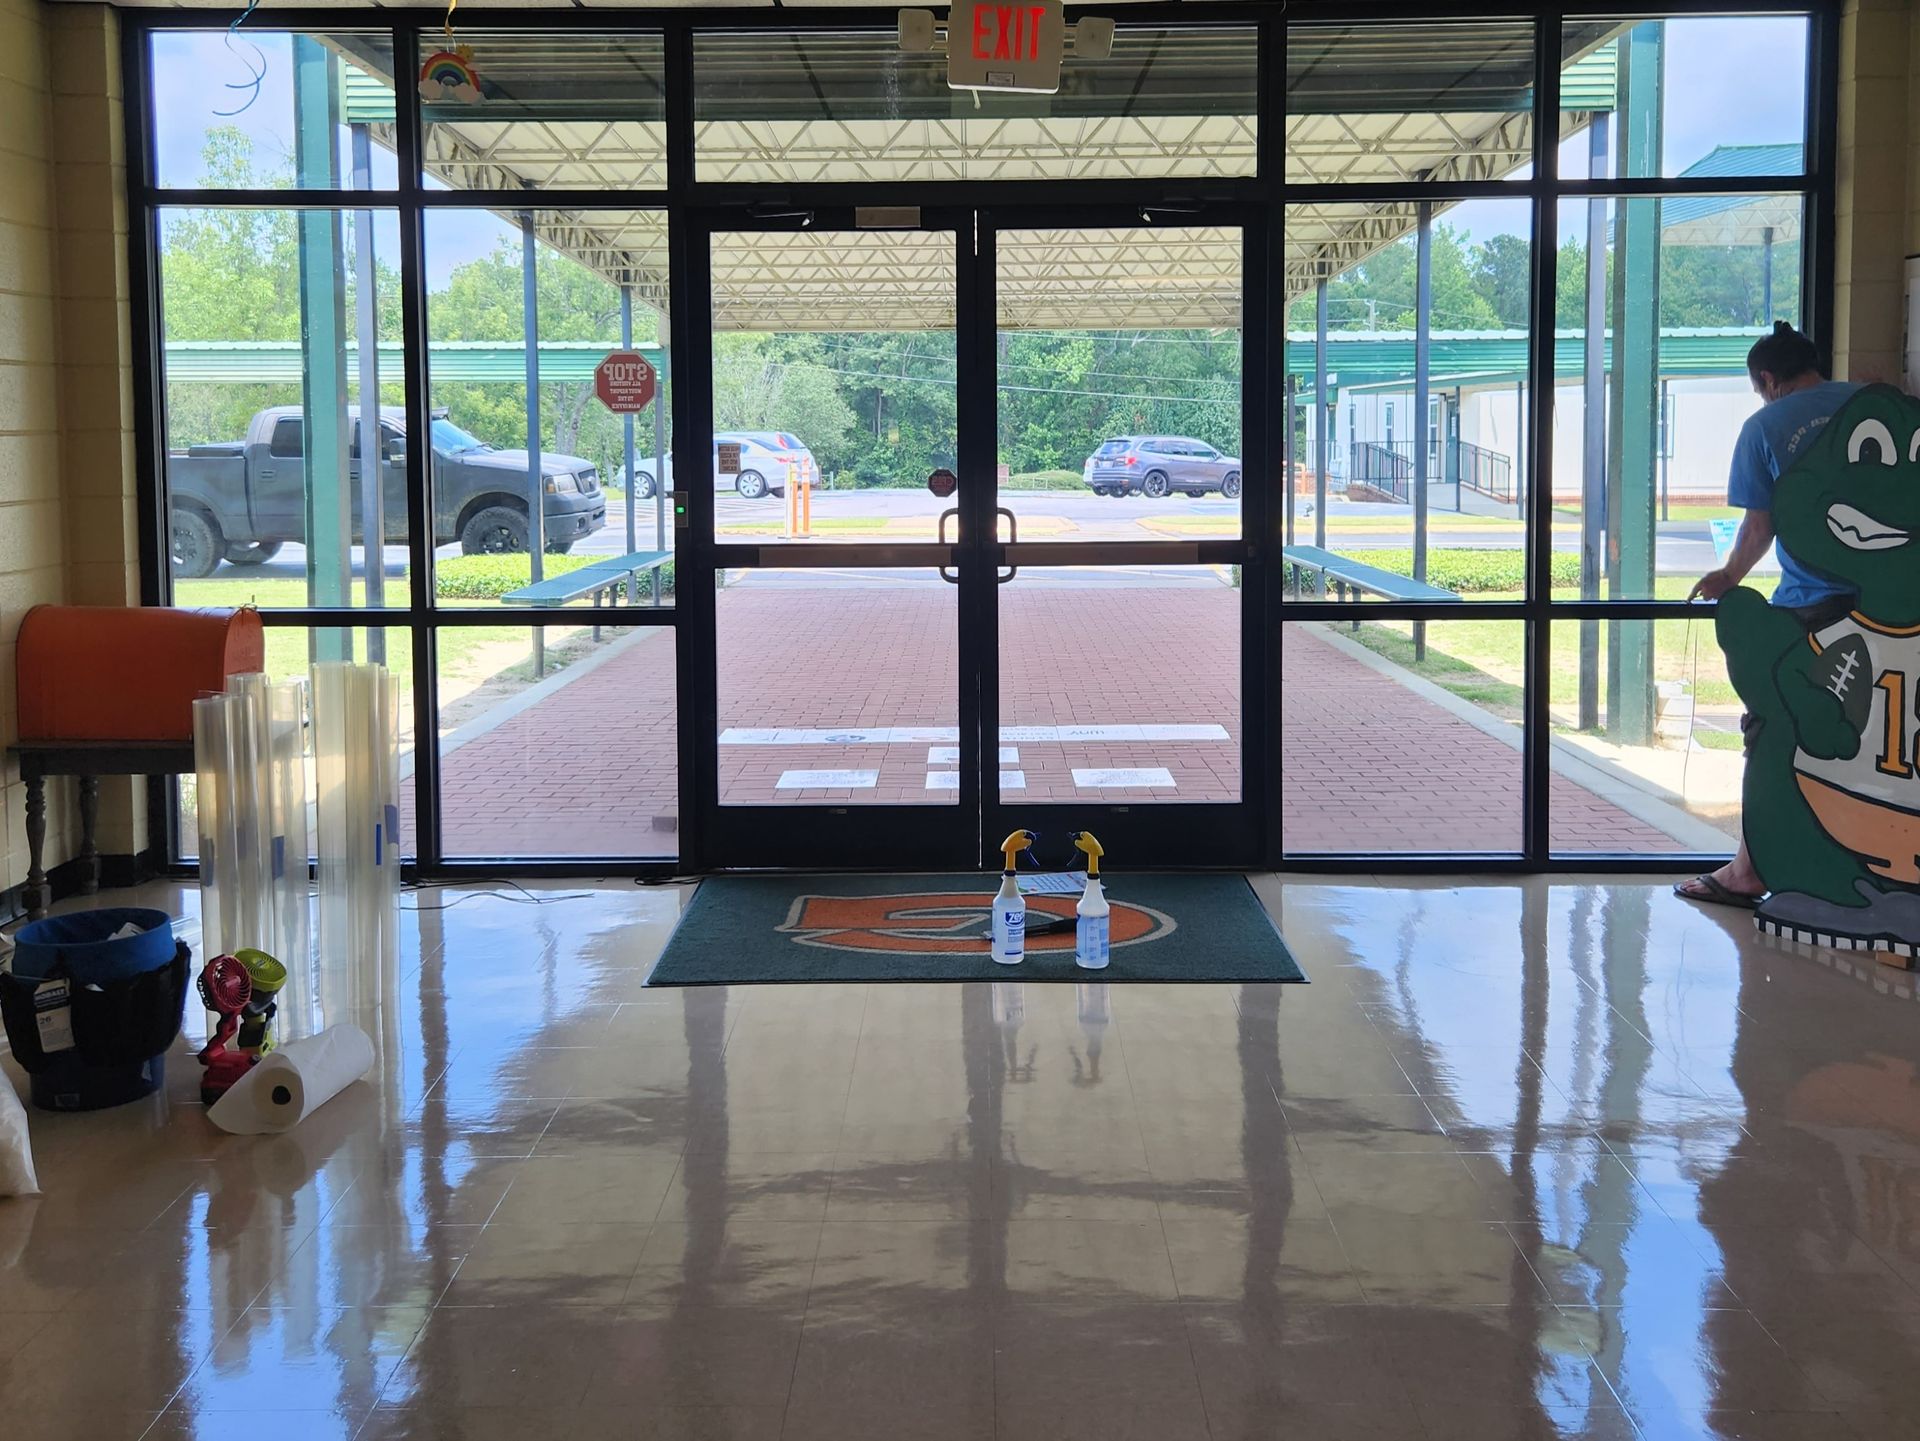 Security film in Auburn Opelika Smiths Station AL - the school is protected from an armed attack break-in or forced entry. Additionally Solar Heat gain and Sun glare was cut adding comfort with visual clarity inside.